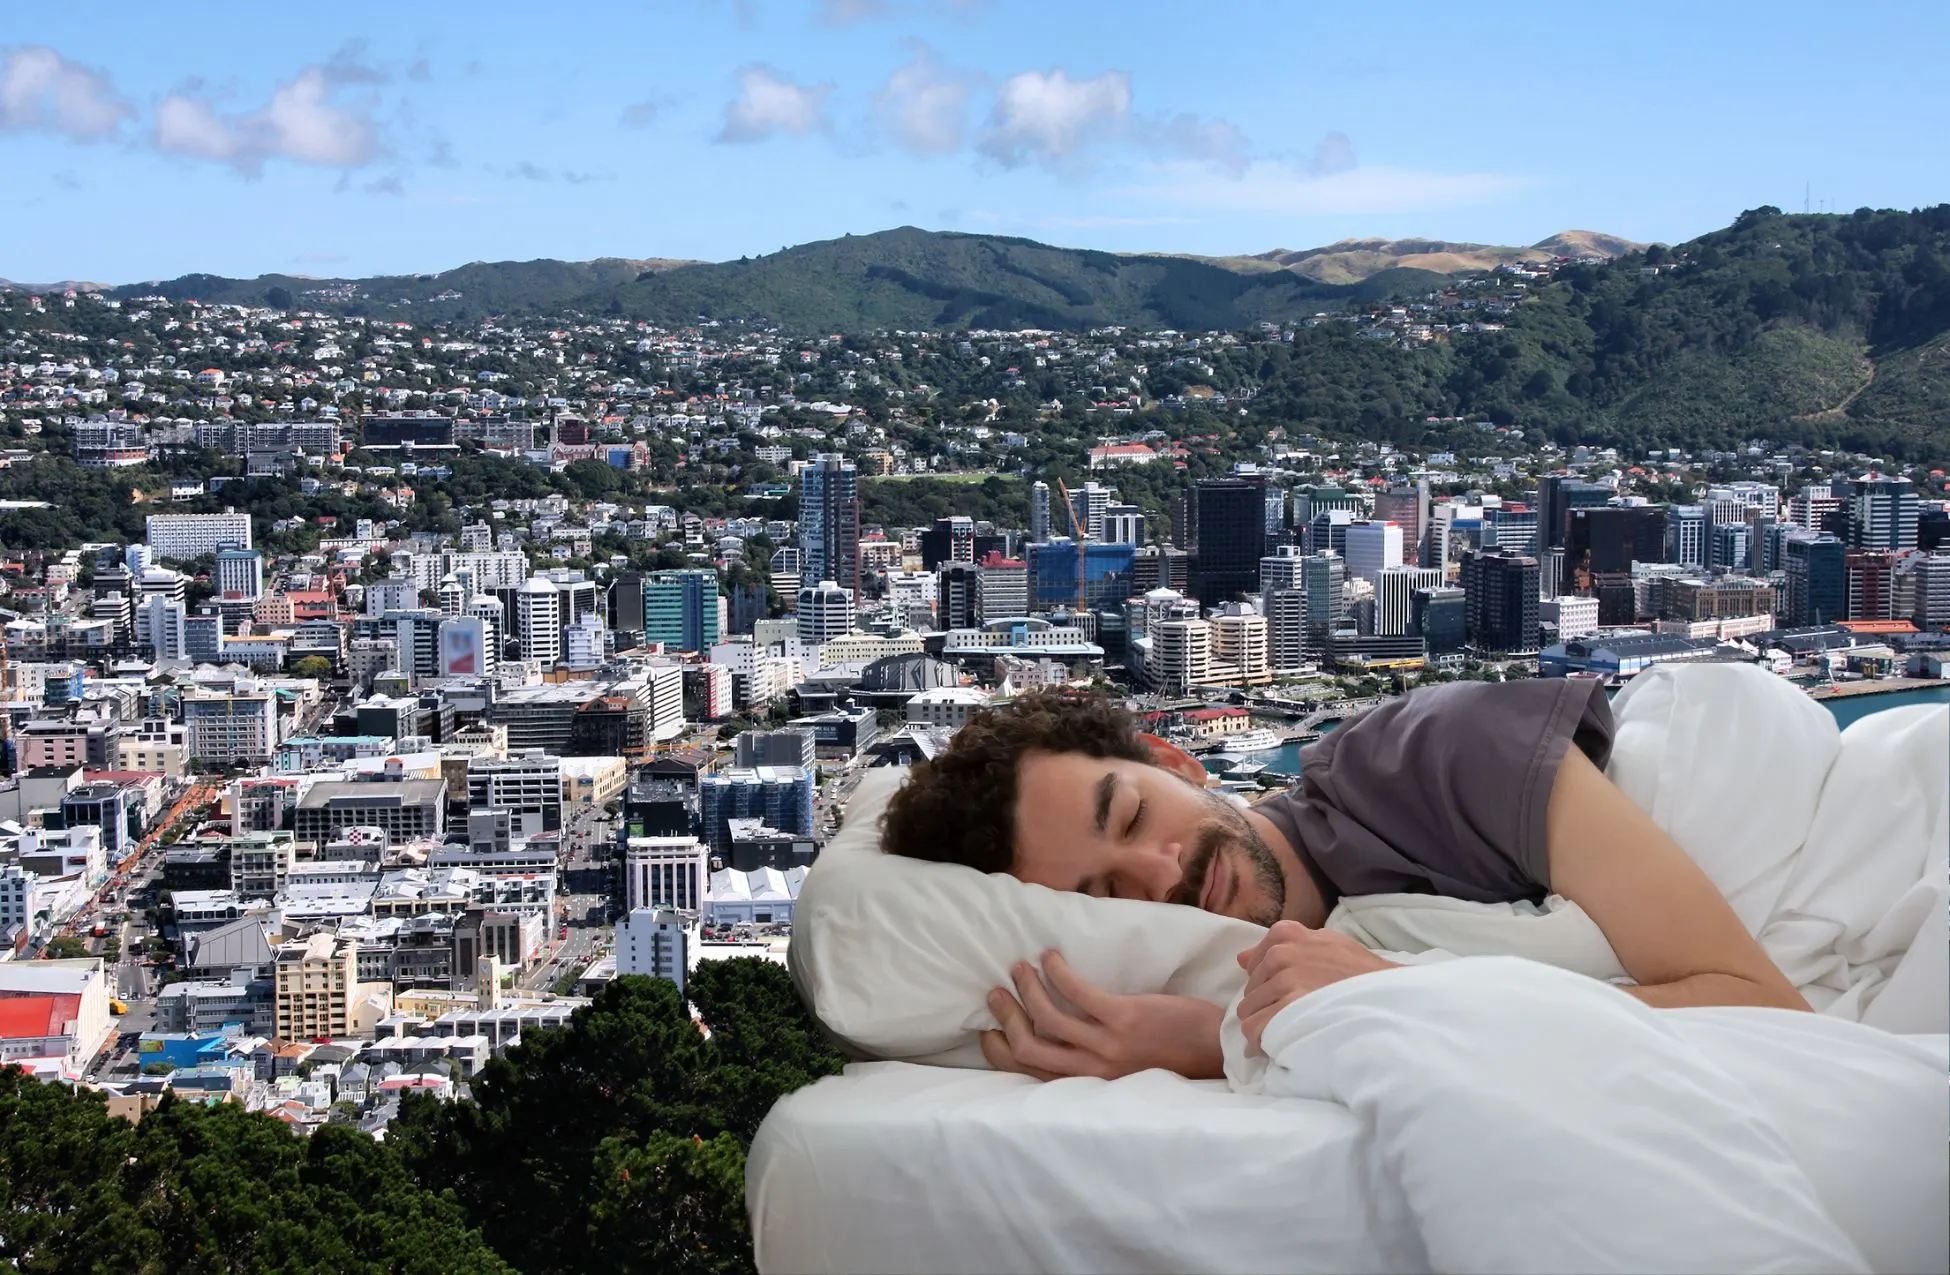 Best Hotels In Wellington: Top Picks For An Unforgettable Stay